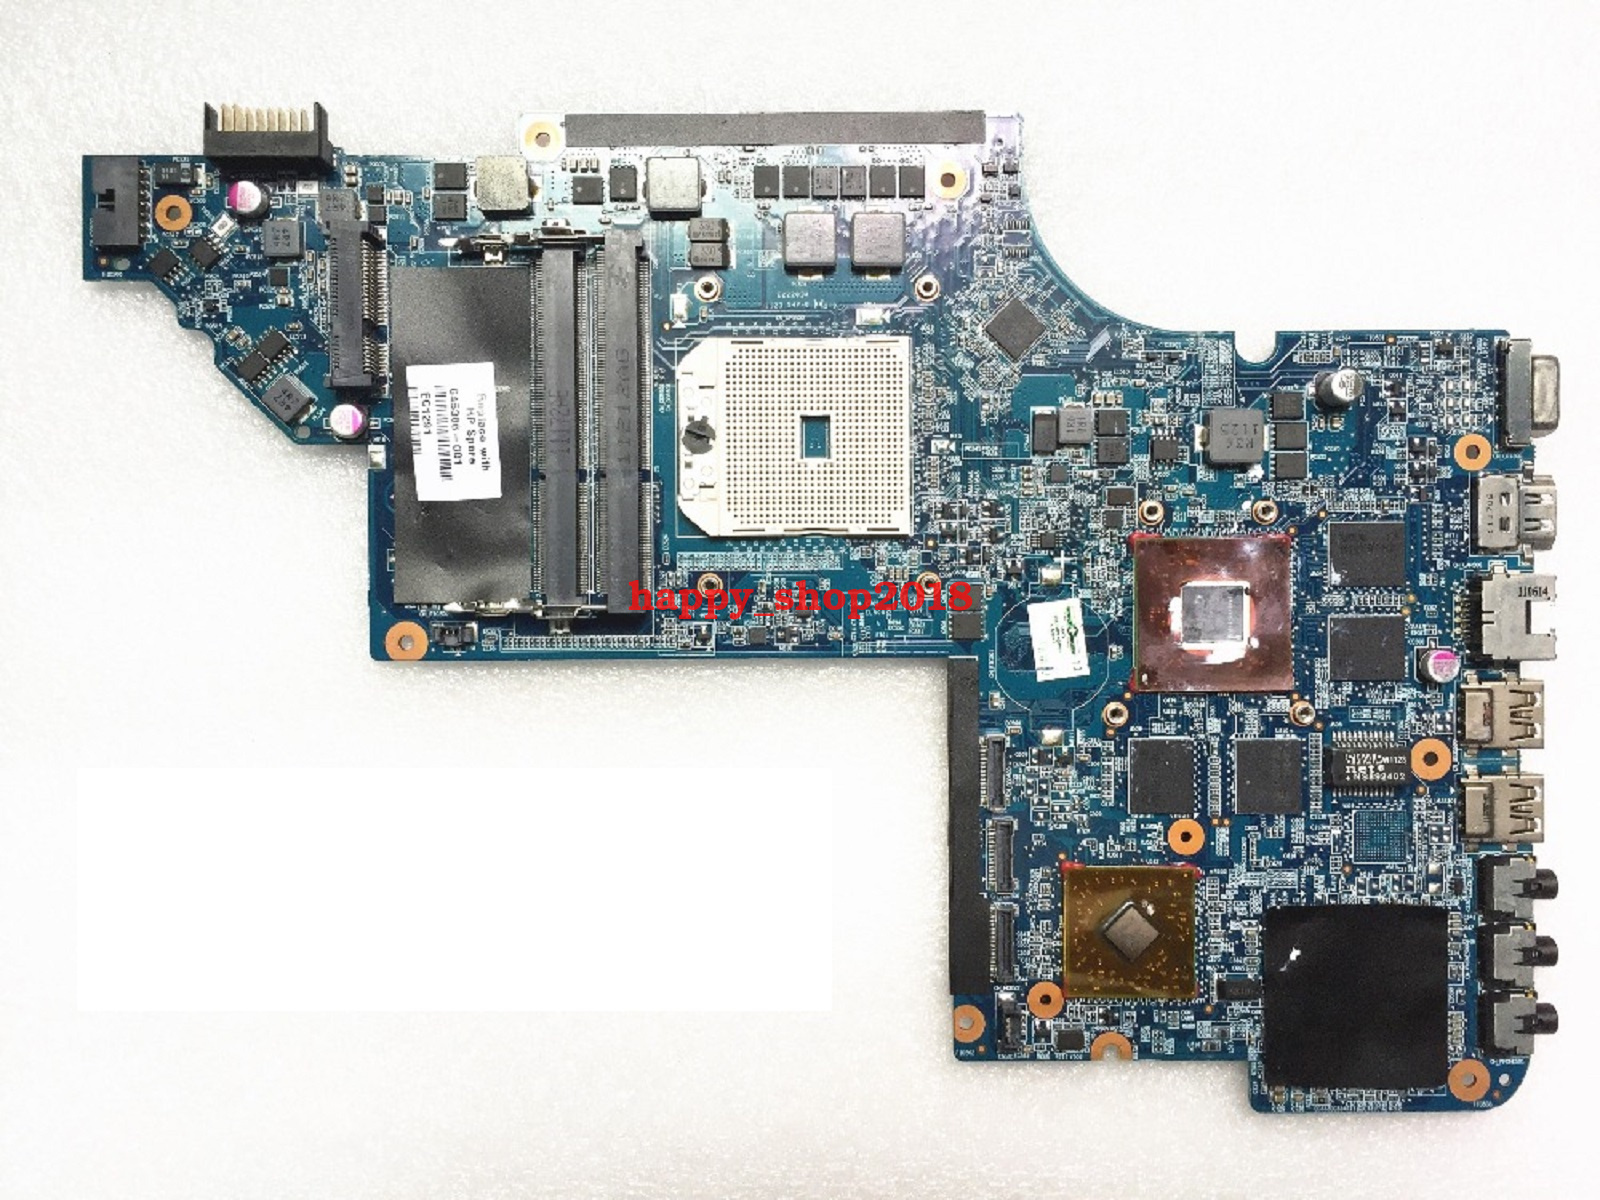 666520-001 for HP DV7 DV7-6000 A70M Chipset HD6750/1GB AMD Motherboard Test Good Brand: HP Number of Memo